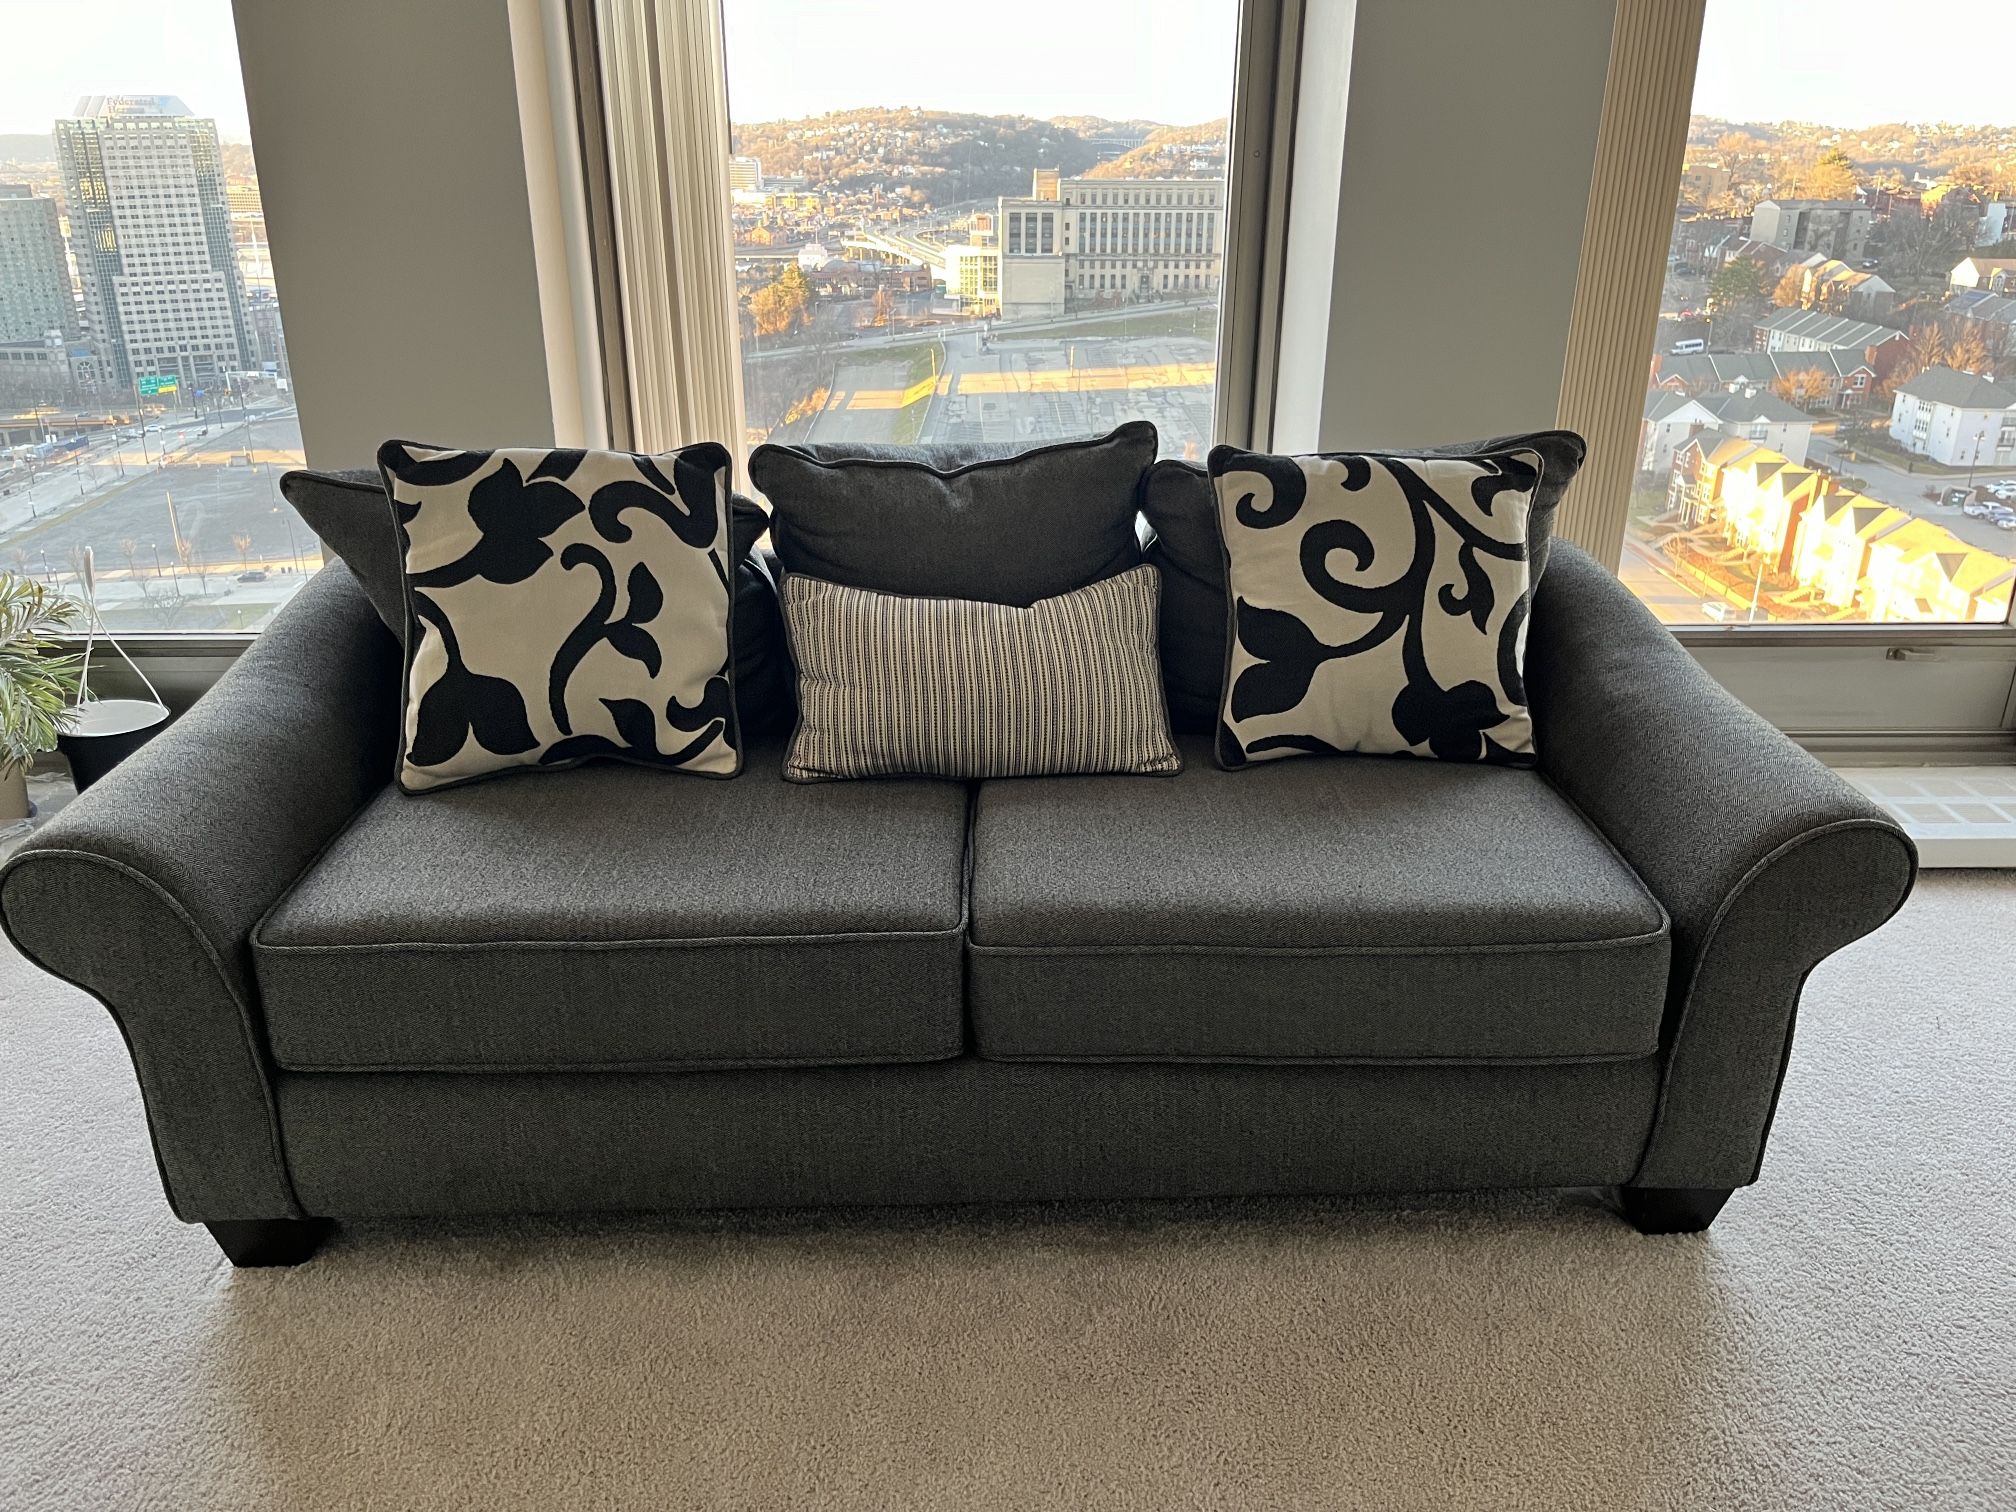 Couch For Sale, Dark Grey